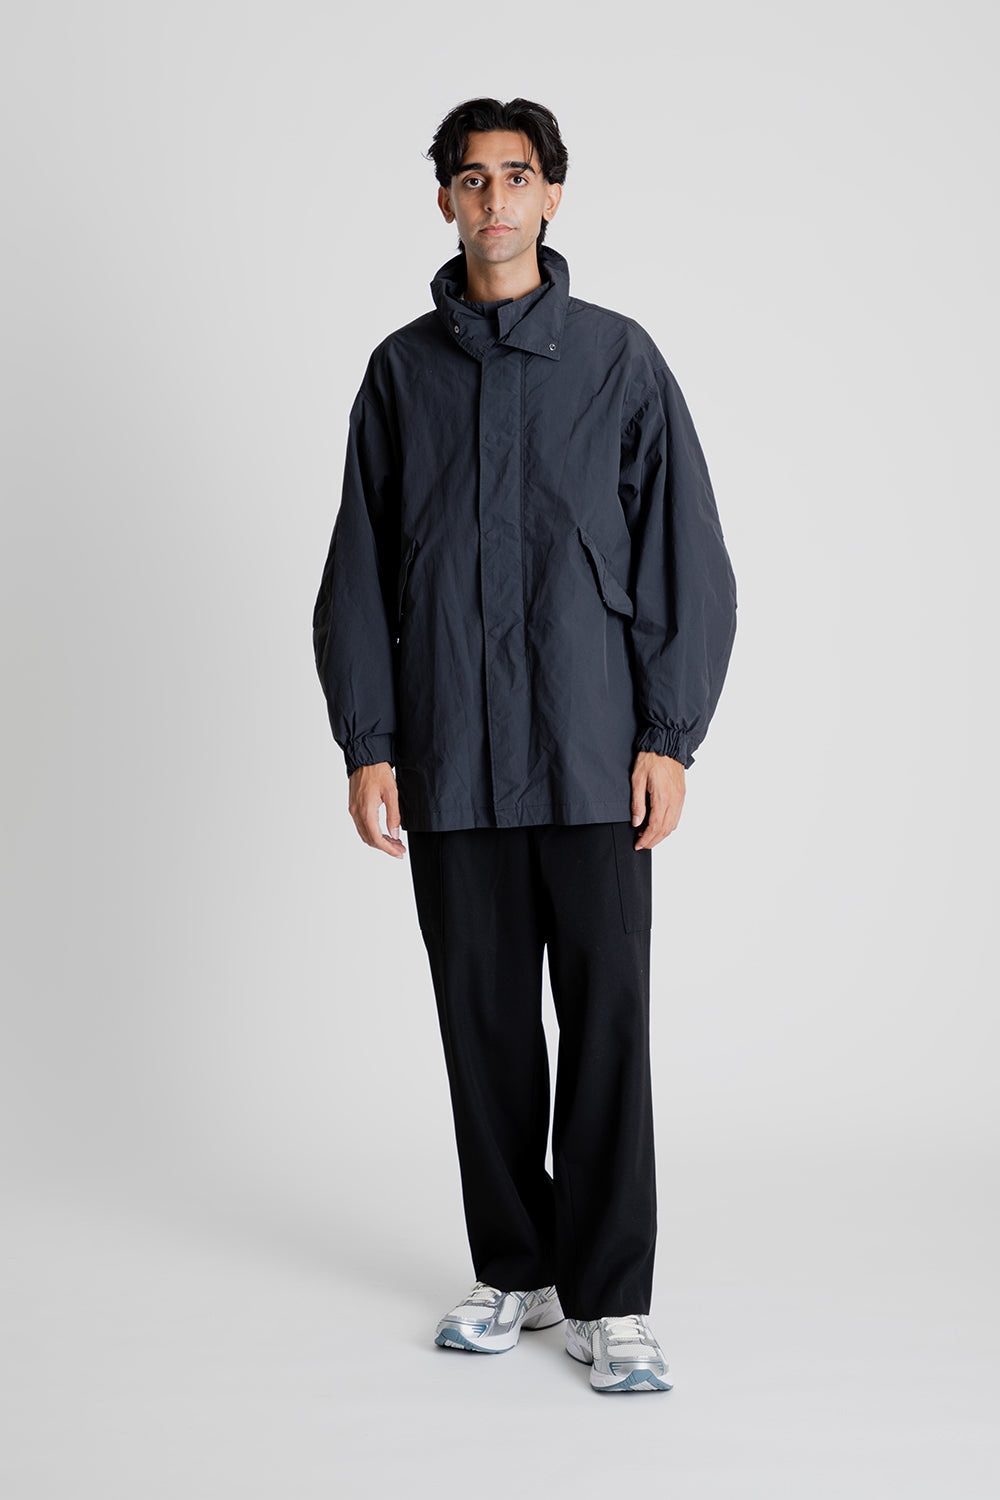 Aton Air Ventile Short Mods Coat in Charcoal Grey | Wallace Mercantil